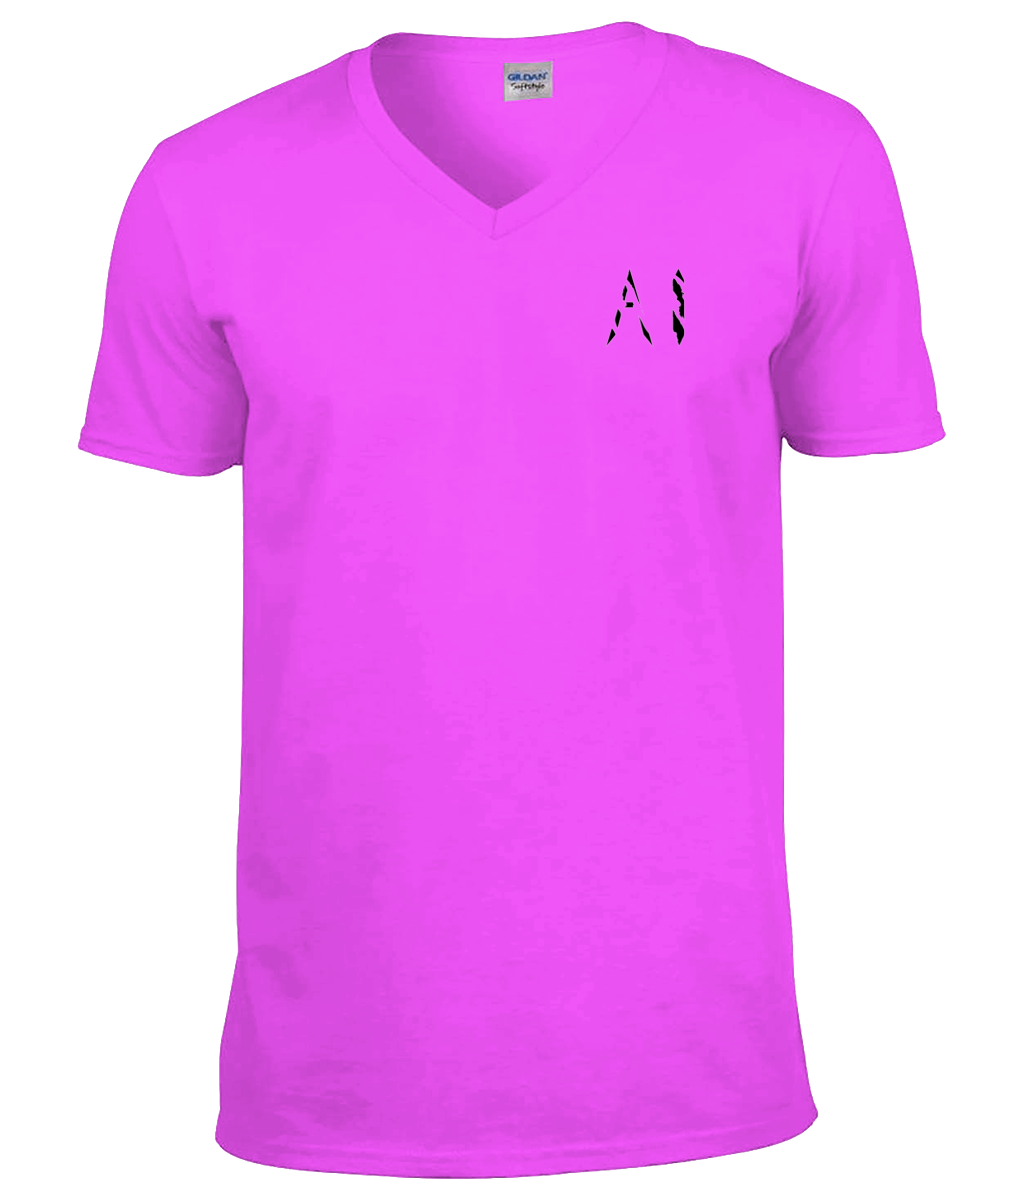 Womens purple Classic V Neck T-Shirt with black AI logo on left breast